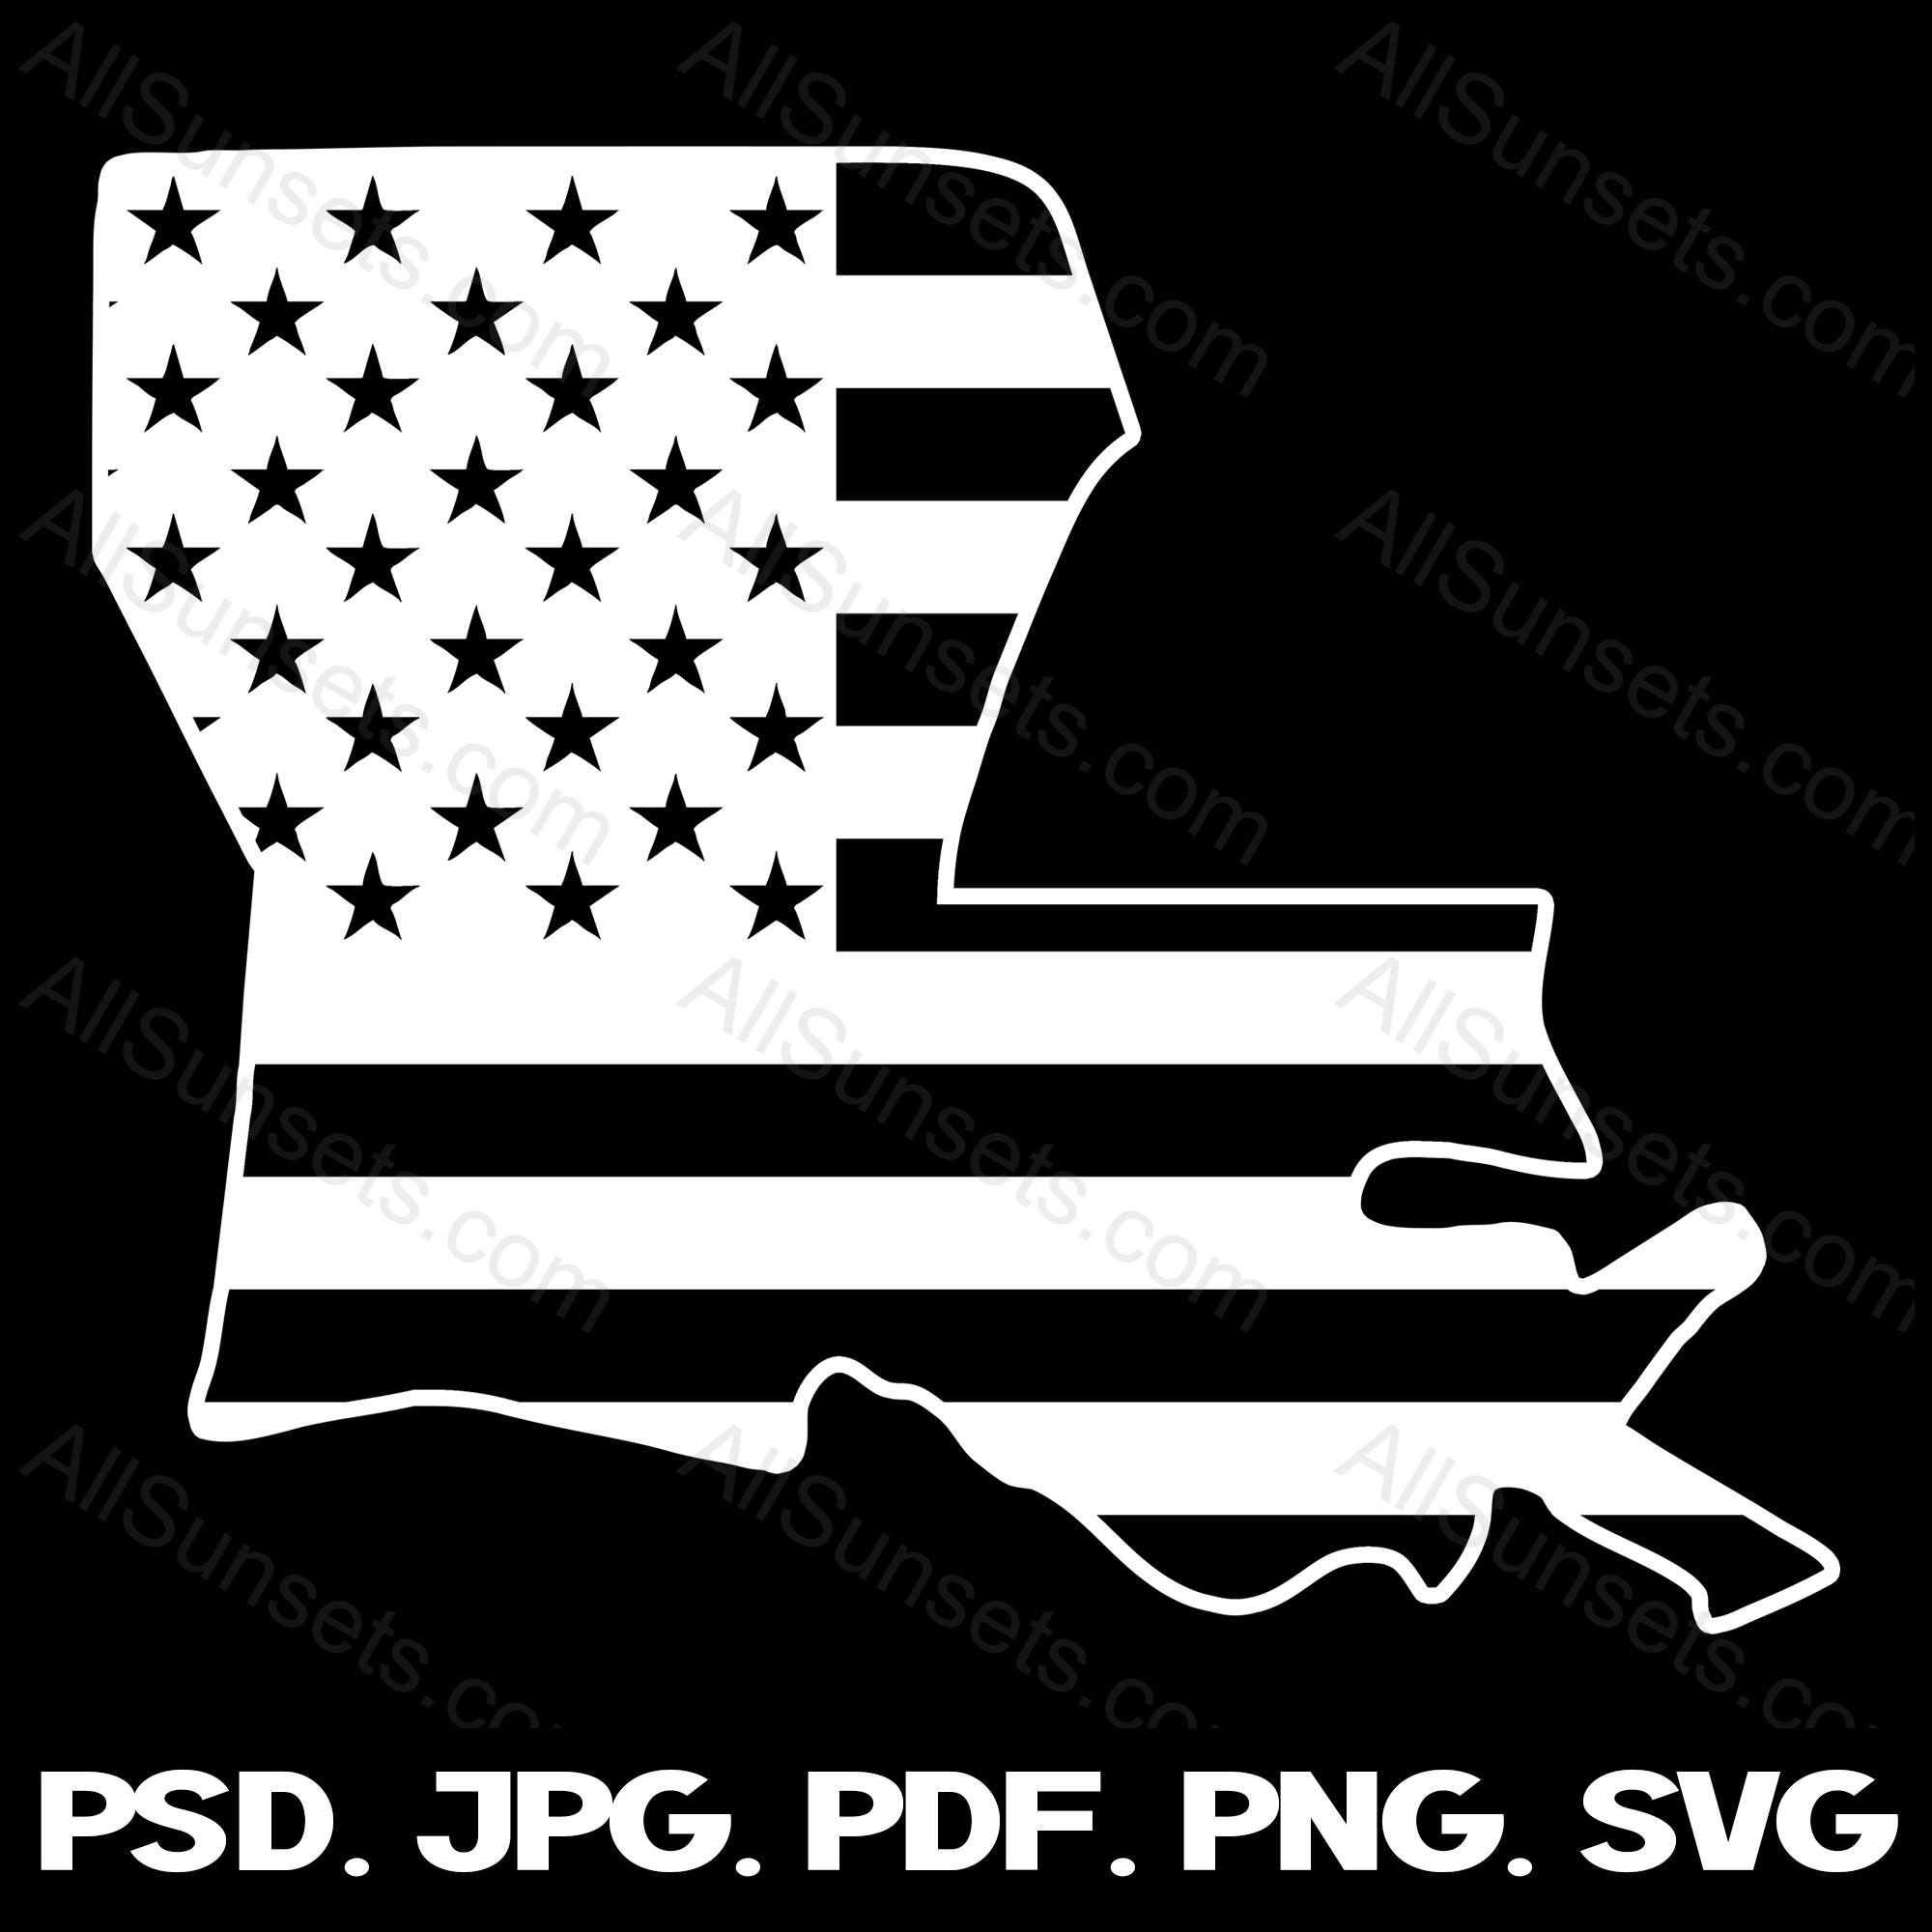 American Flag in Louisiana State Map. Vector Grunge Style with Typography  Hand Drawn Lettering Louisiana on Map Shaped Old Grunge Stock Vector -  Illustration of louisiana, shape: 186906561